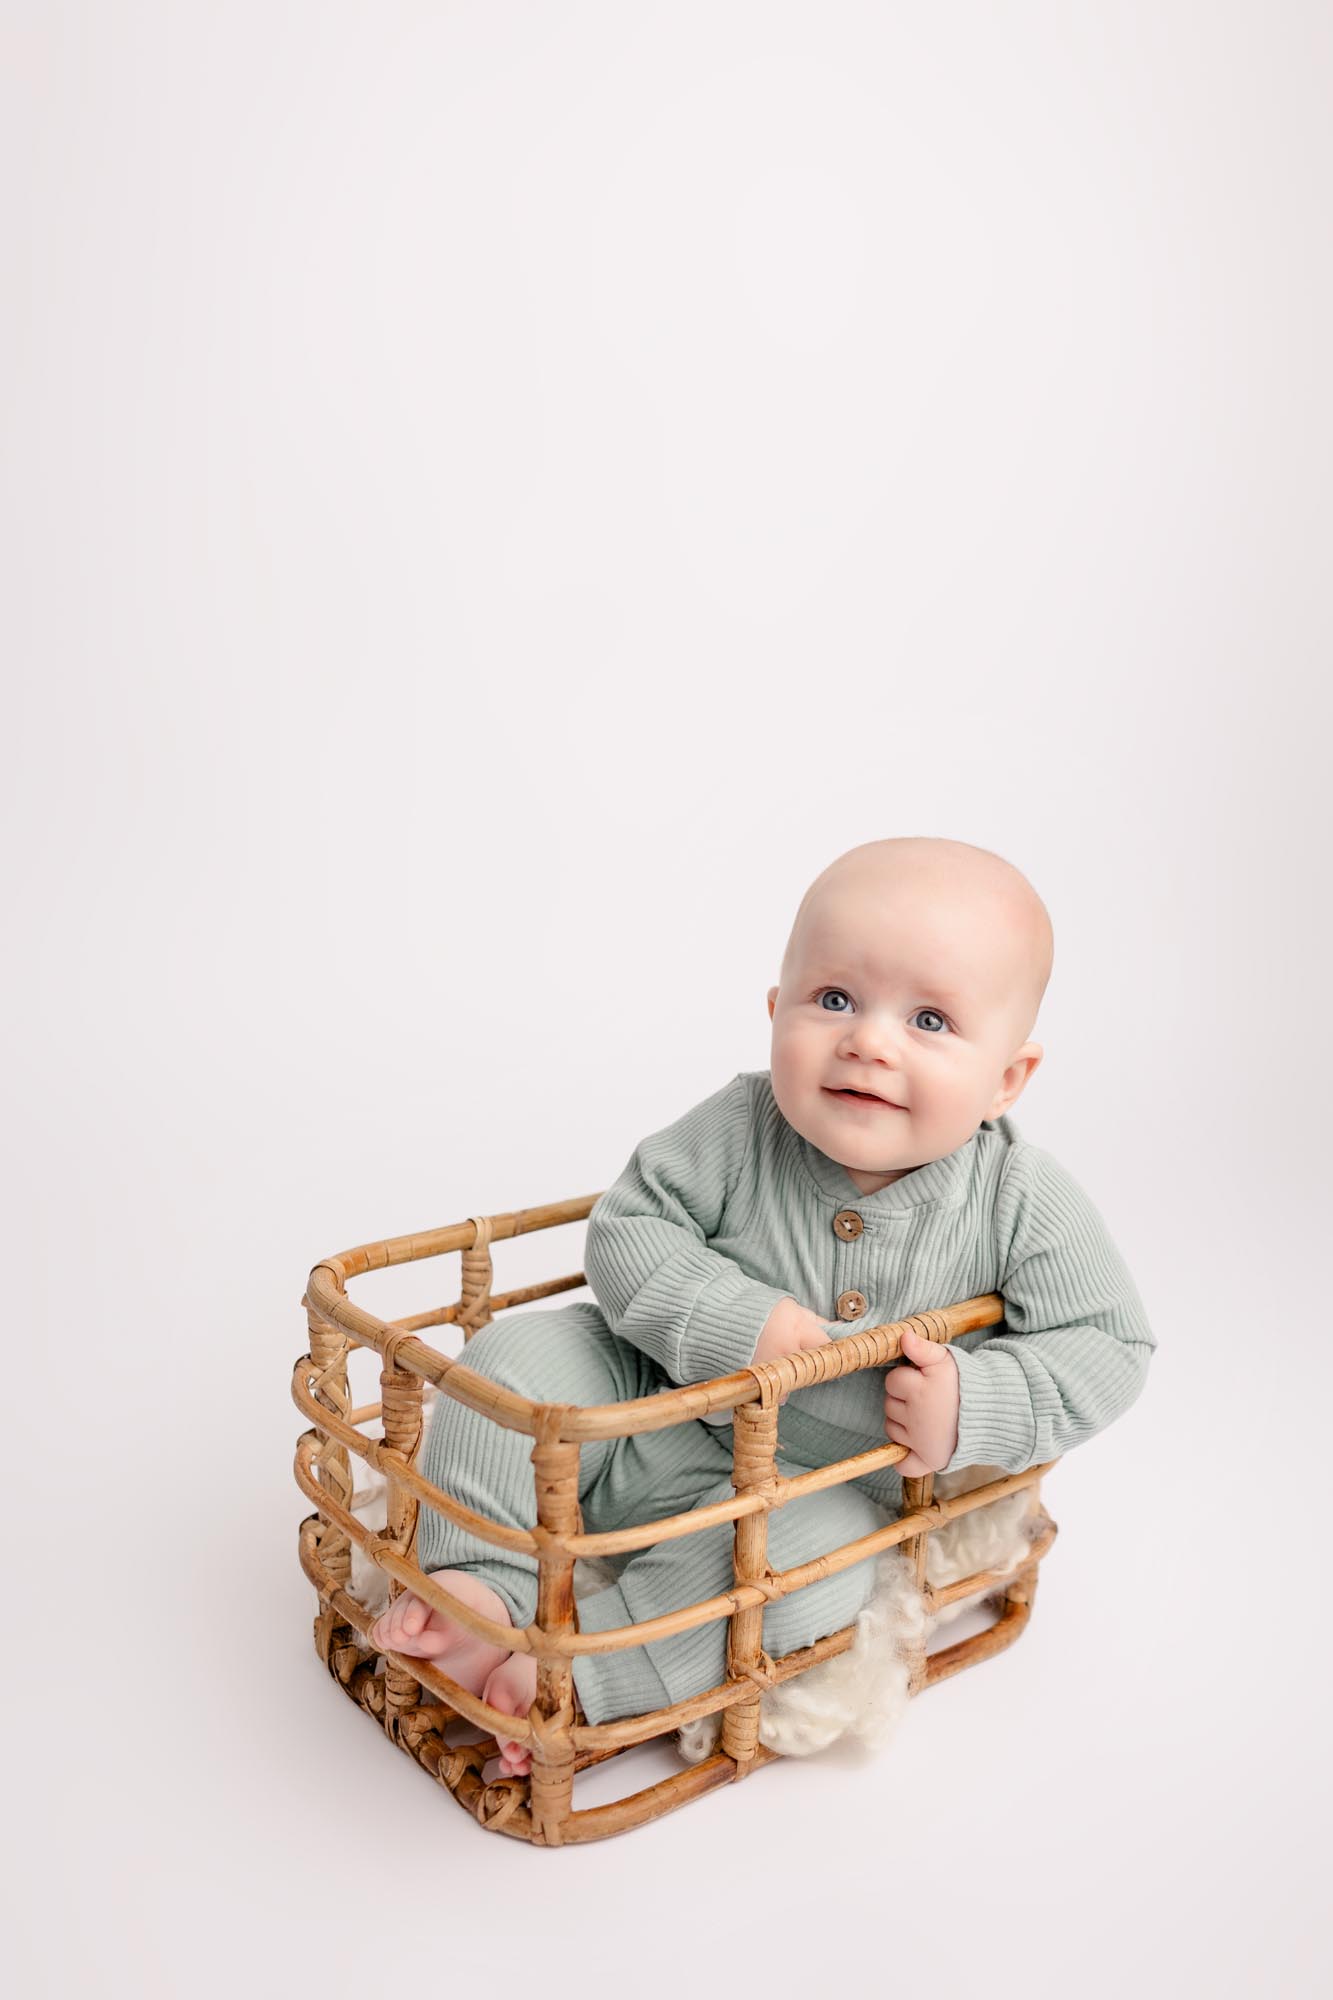 Baby boy sitting in a basket in a mint green outfit during 6 month milestone pictures